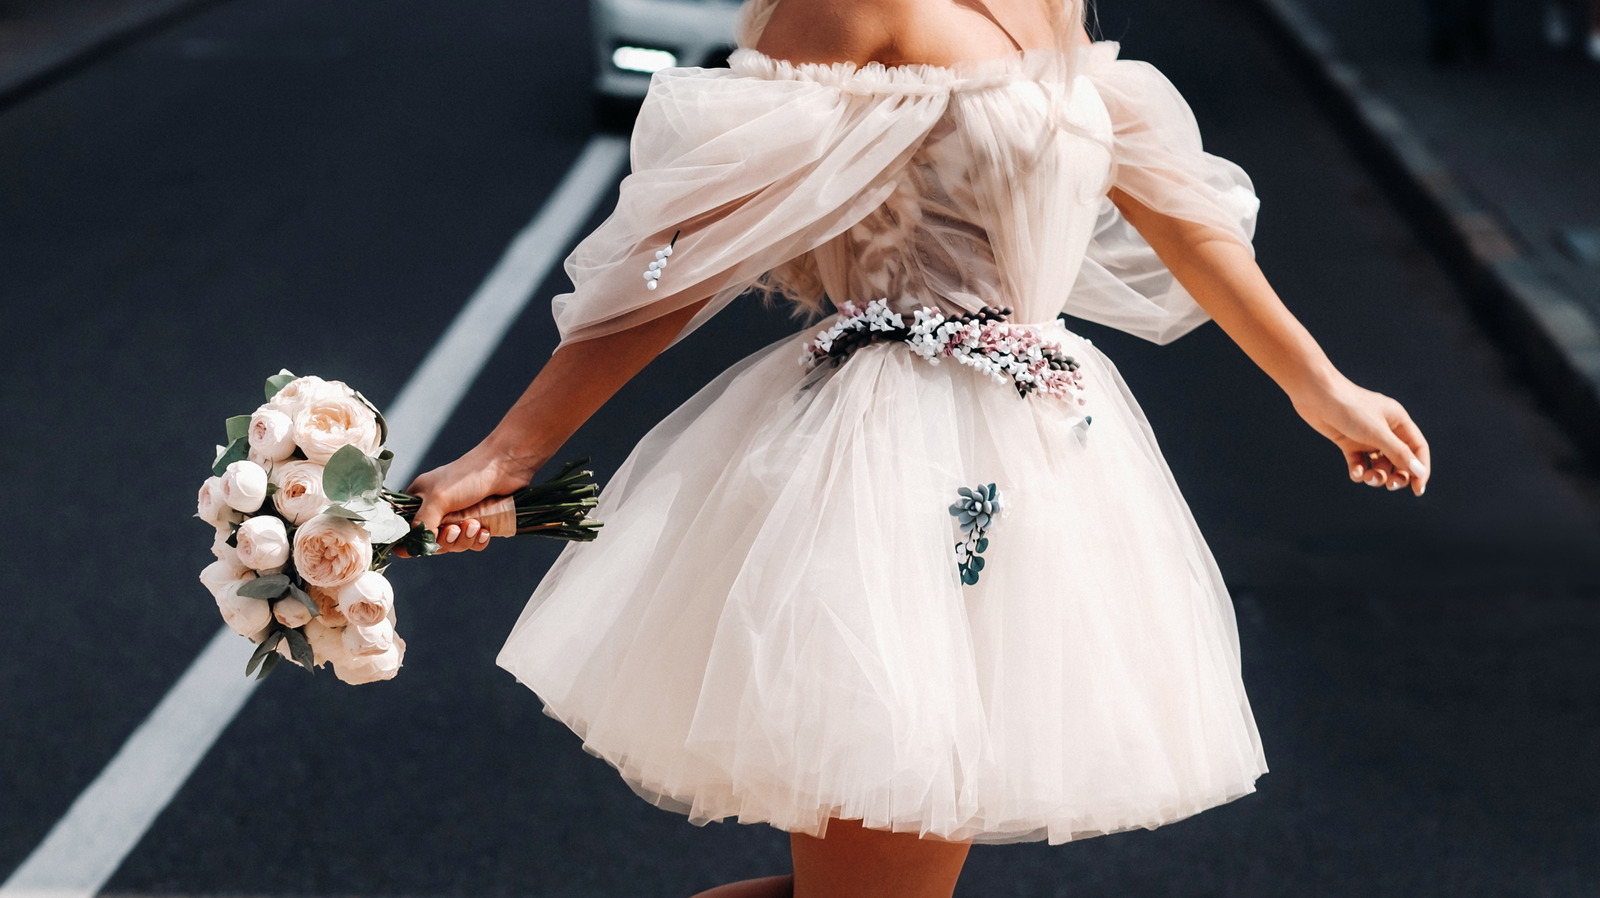 How To Style A Short Wedding Dress